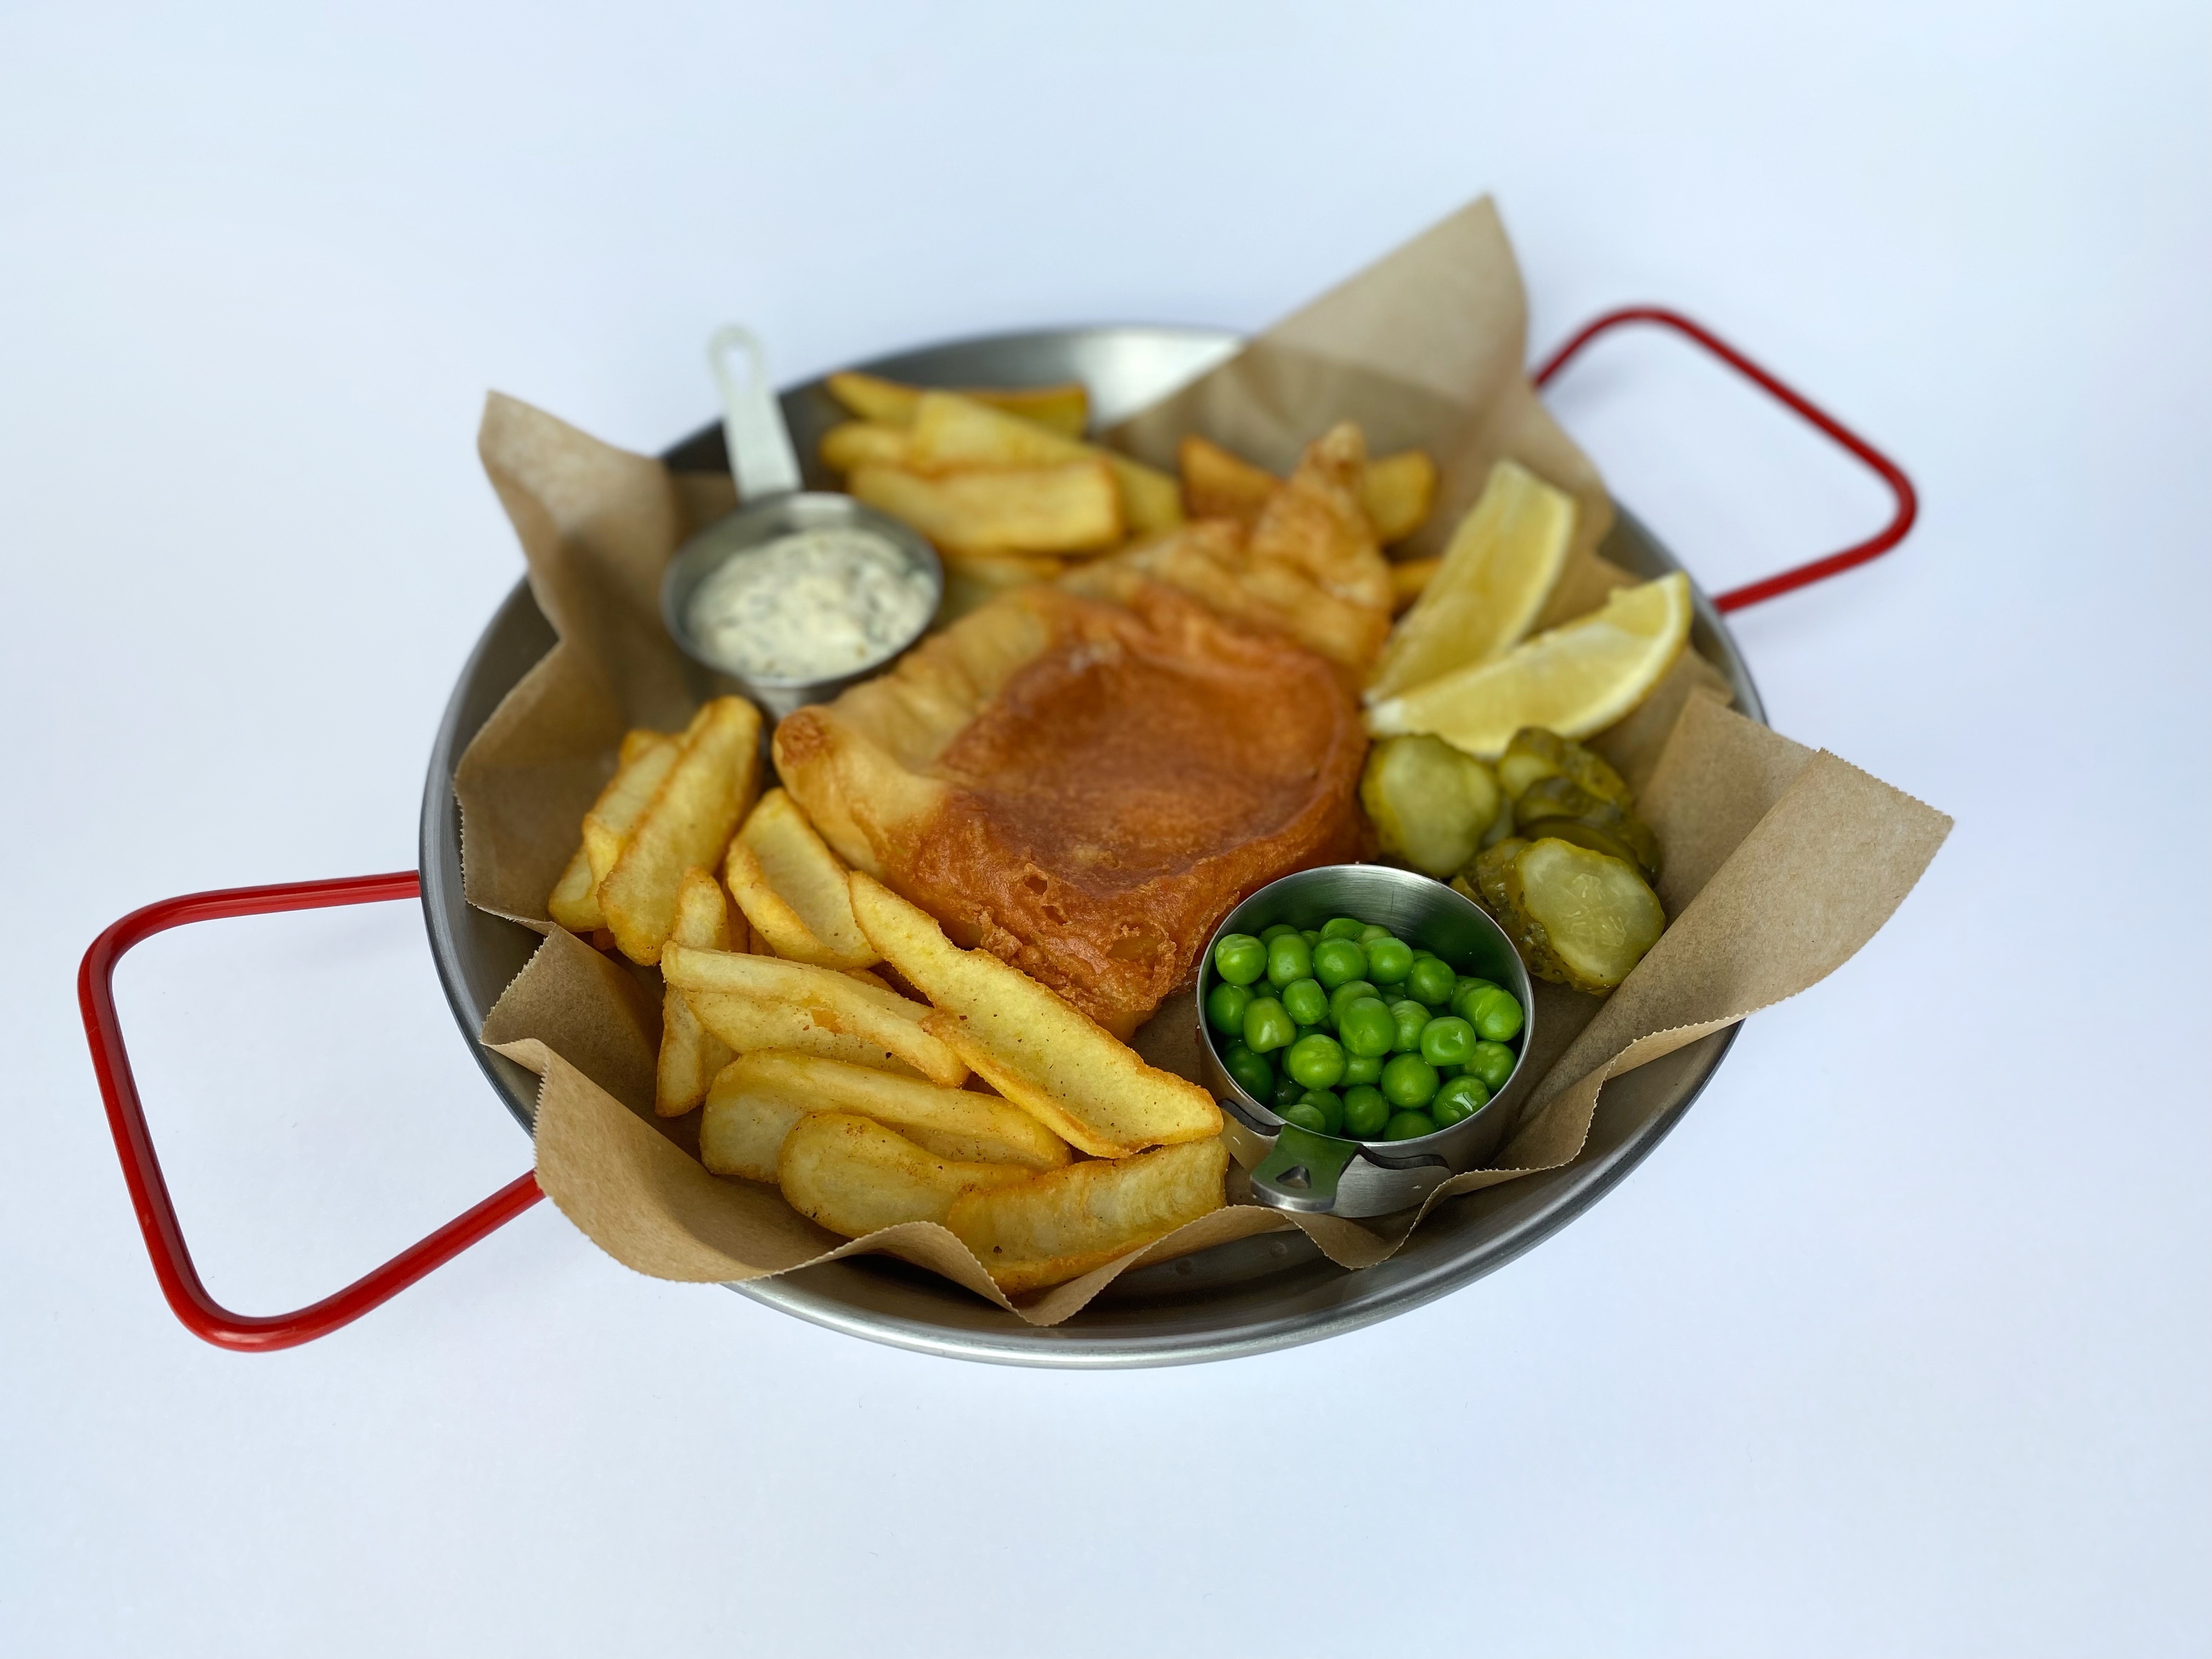 <span style="color: rgb(0, 0, 0);">Fish &amp; Chips из трески</span><br>